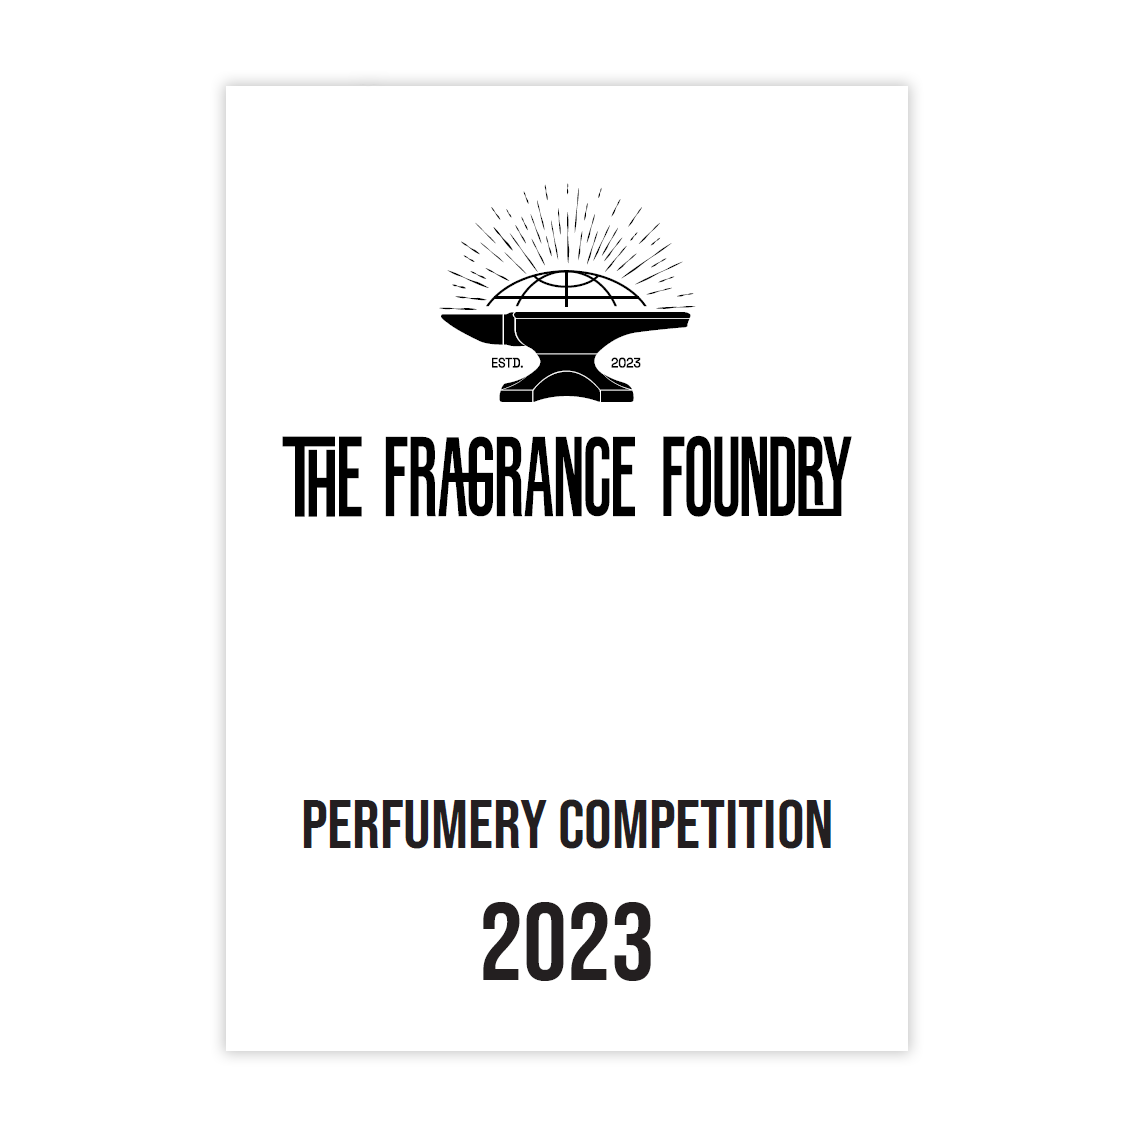 Perfumery competition 2023 winners booklet